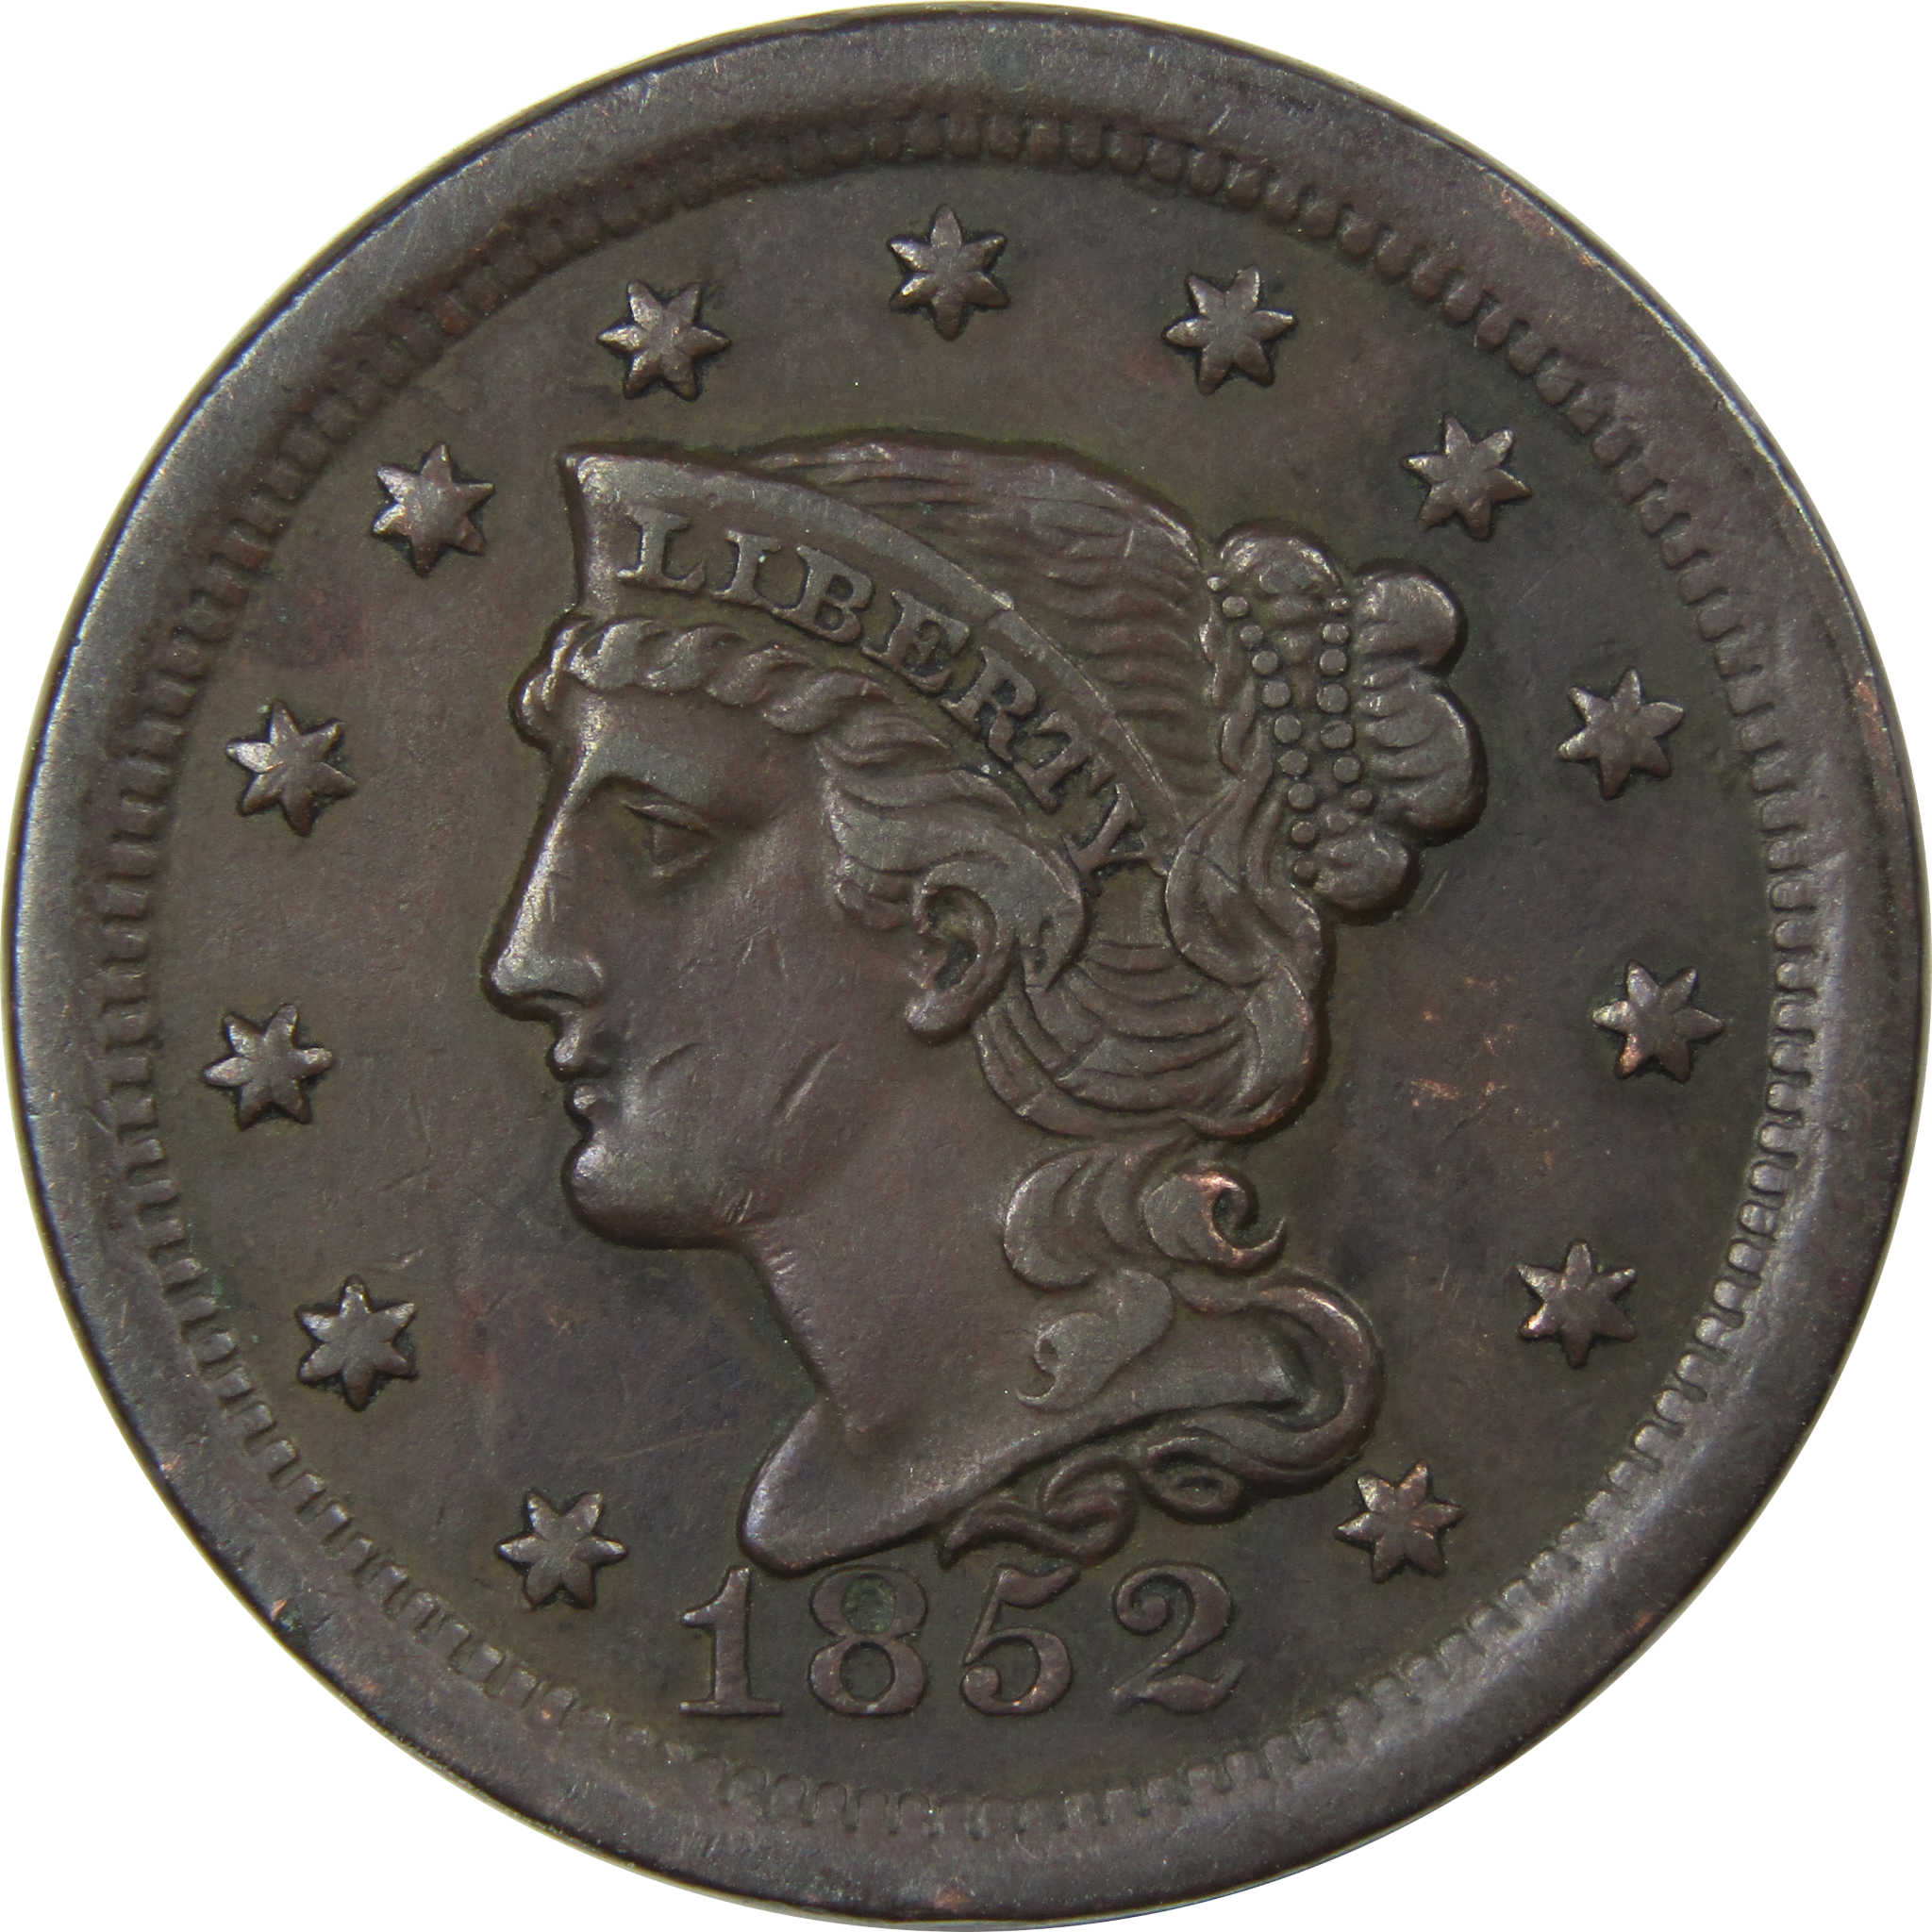 1851 Braided Hair Large Cent ANACS F-12 Details Residue-Cleaned (43) —  Juliancoin